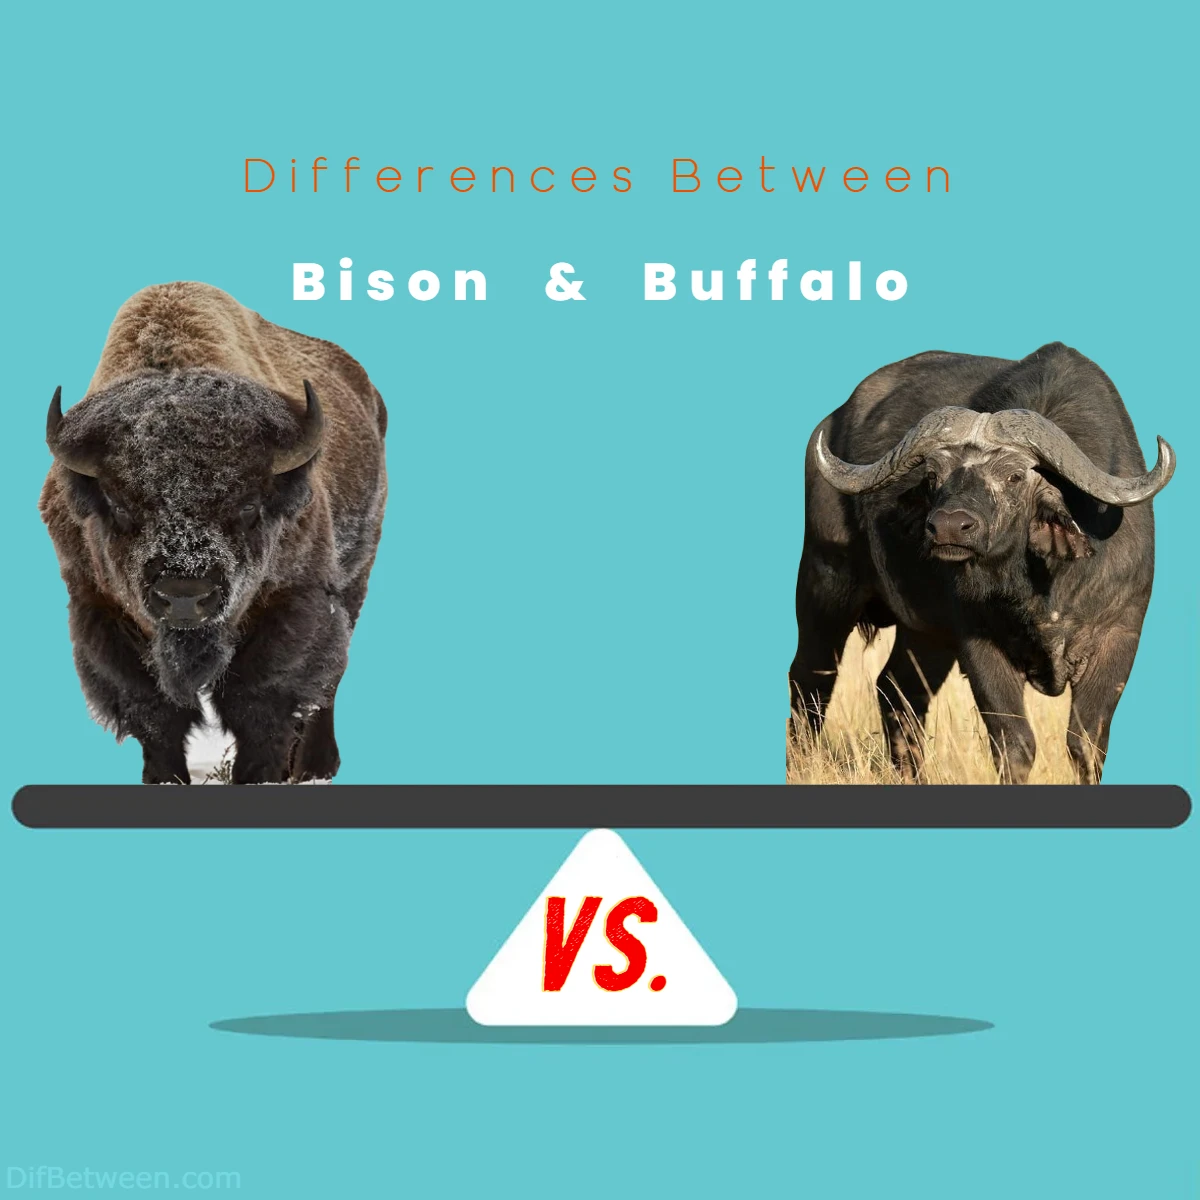 Differences Between Bison vs Buffalo